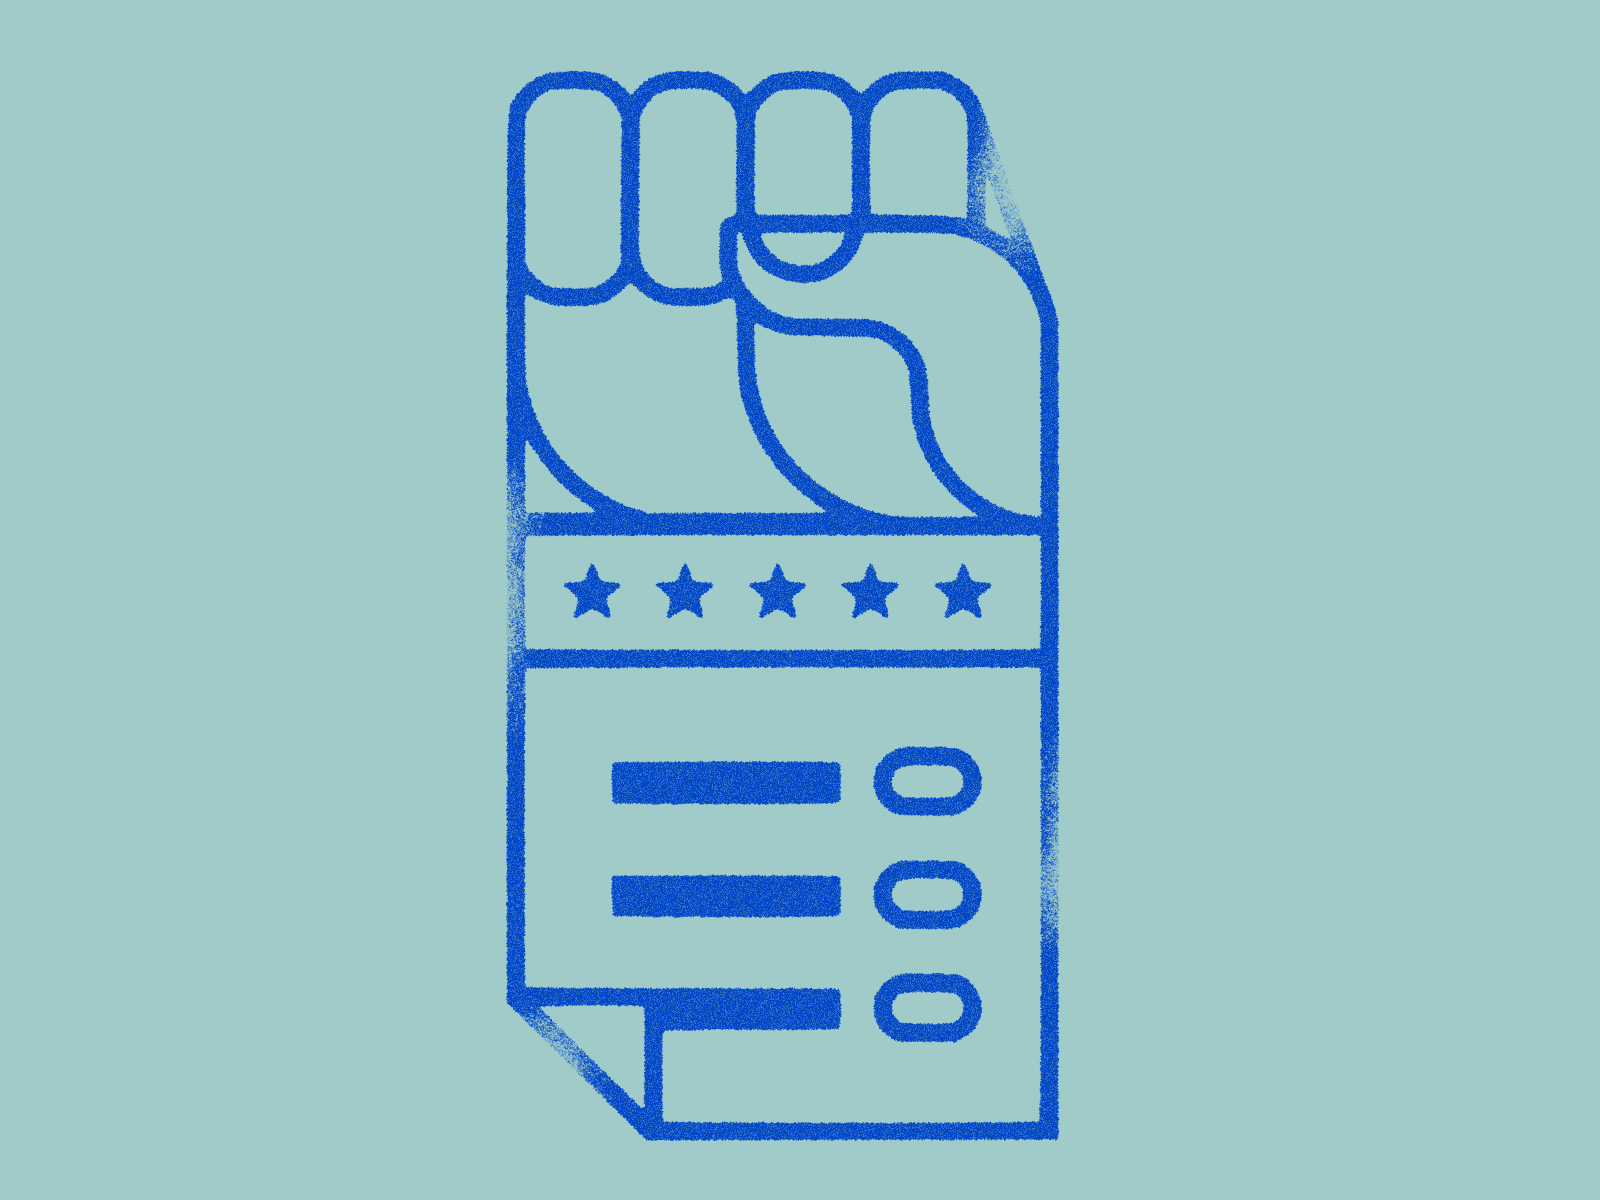 Your Vote is Power fist hand icon iconography illustration power texture vote voting